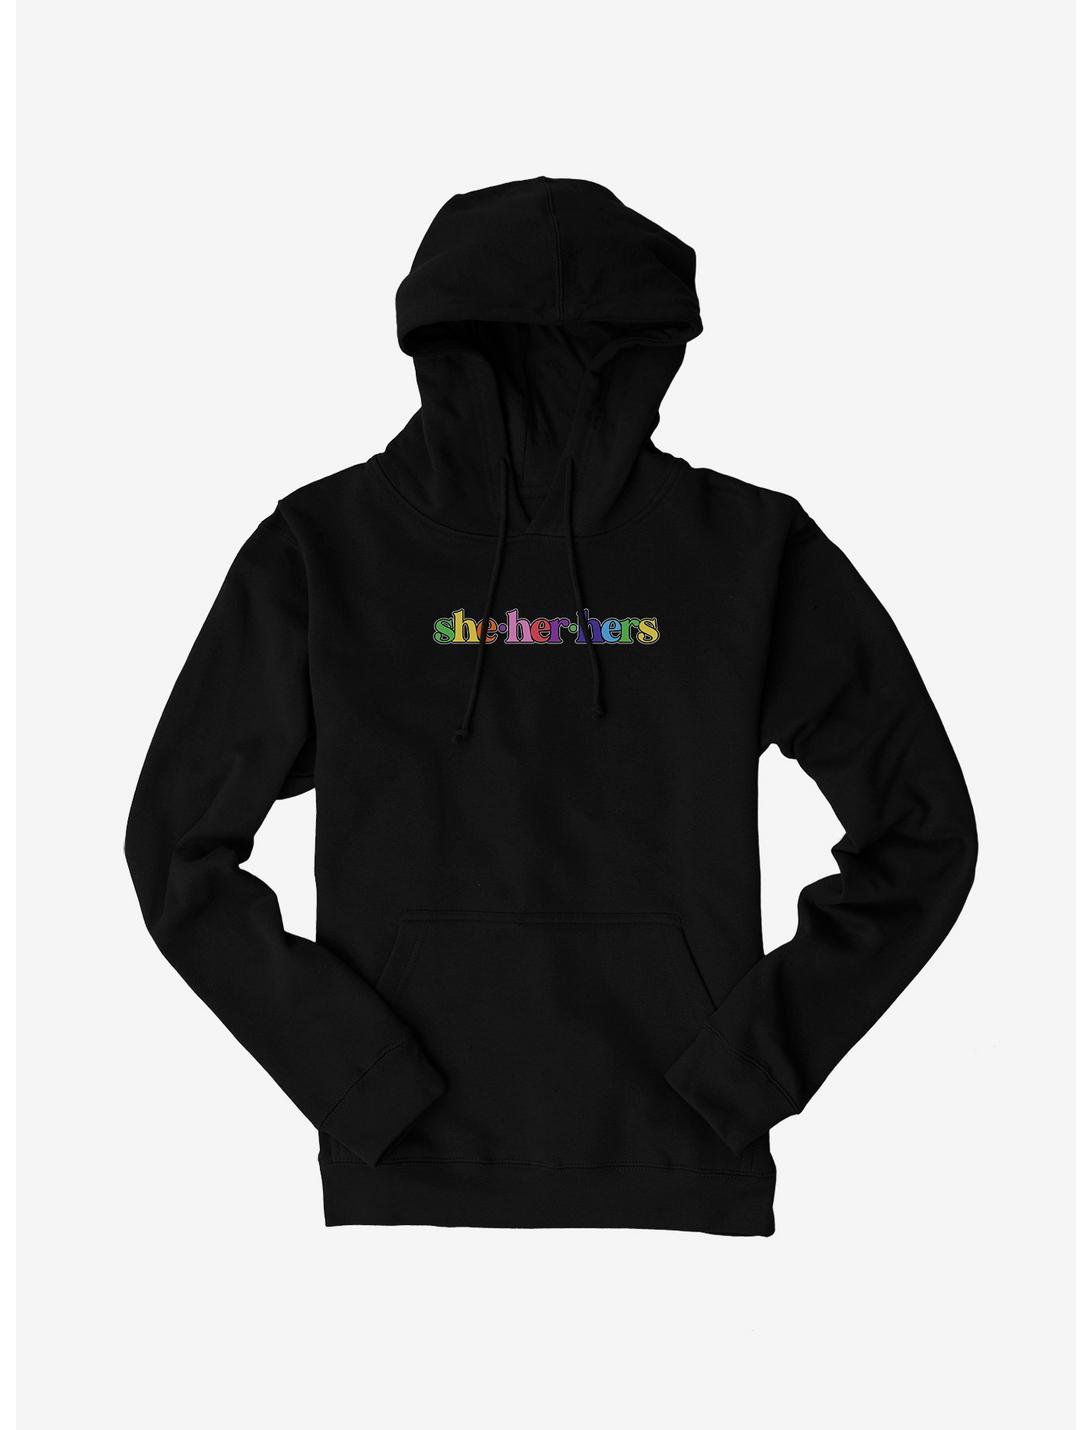 Pride She Her Hers Pronouns Hoodie, , hi-res